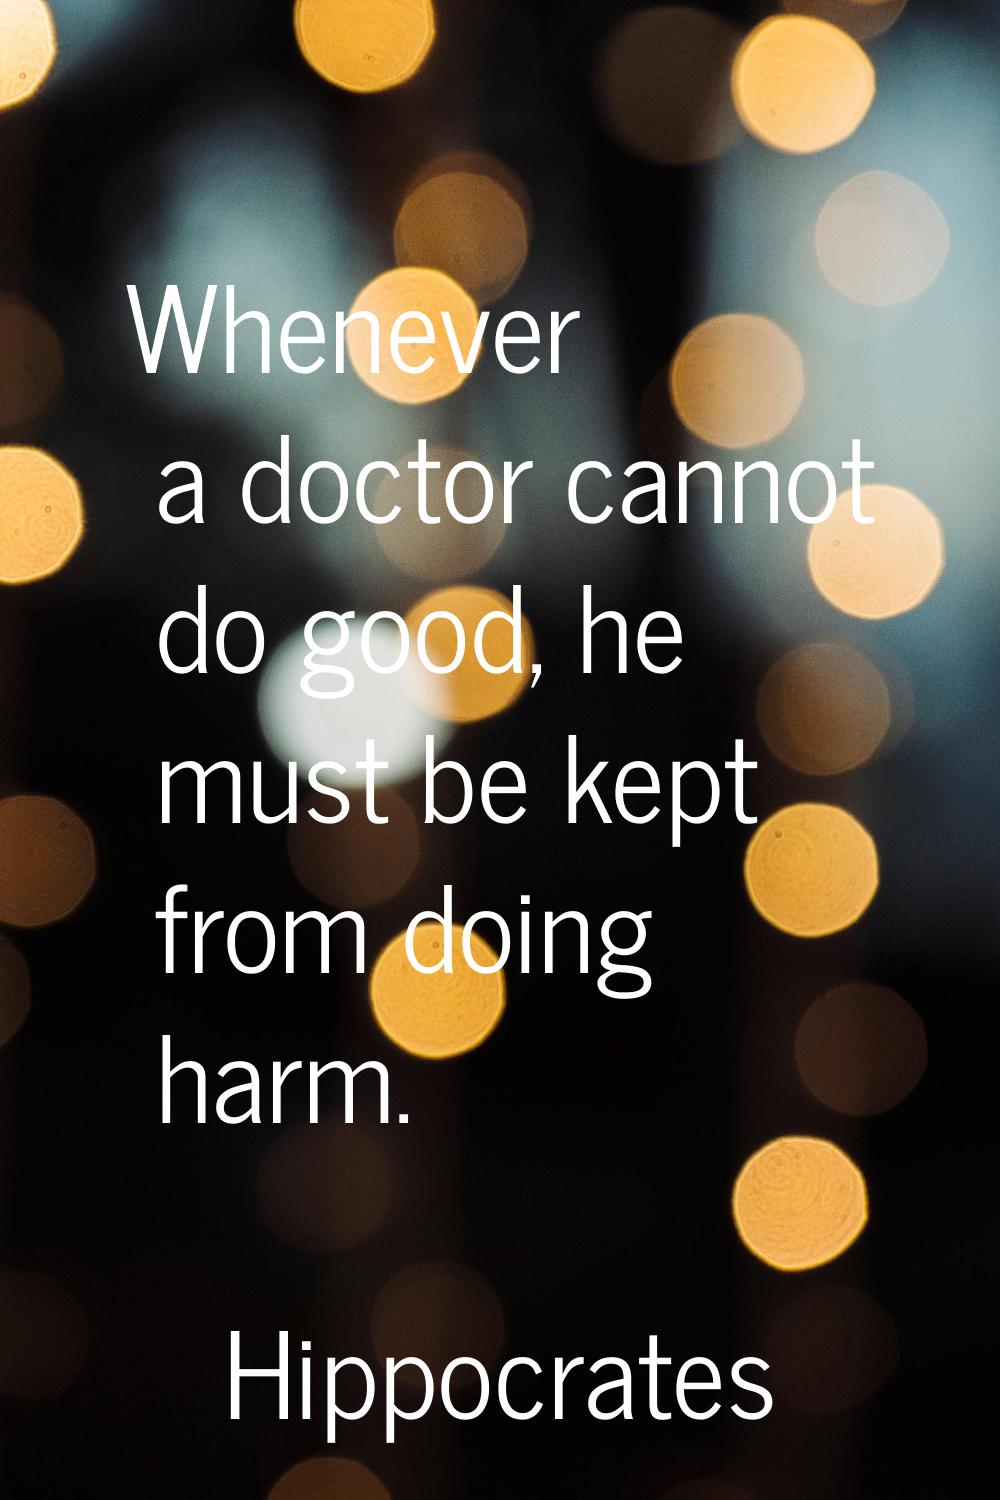 Whenever a doctor cannot do good, he must be kept from doing harm.